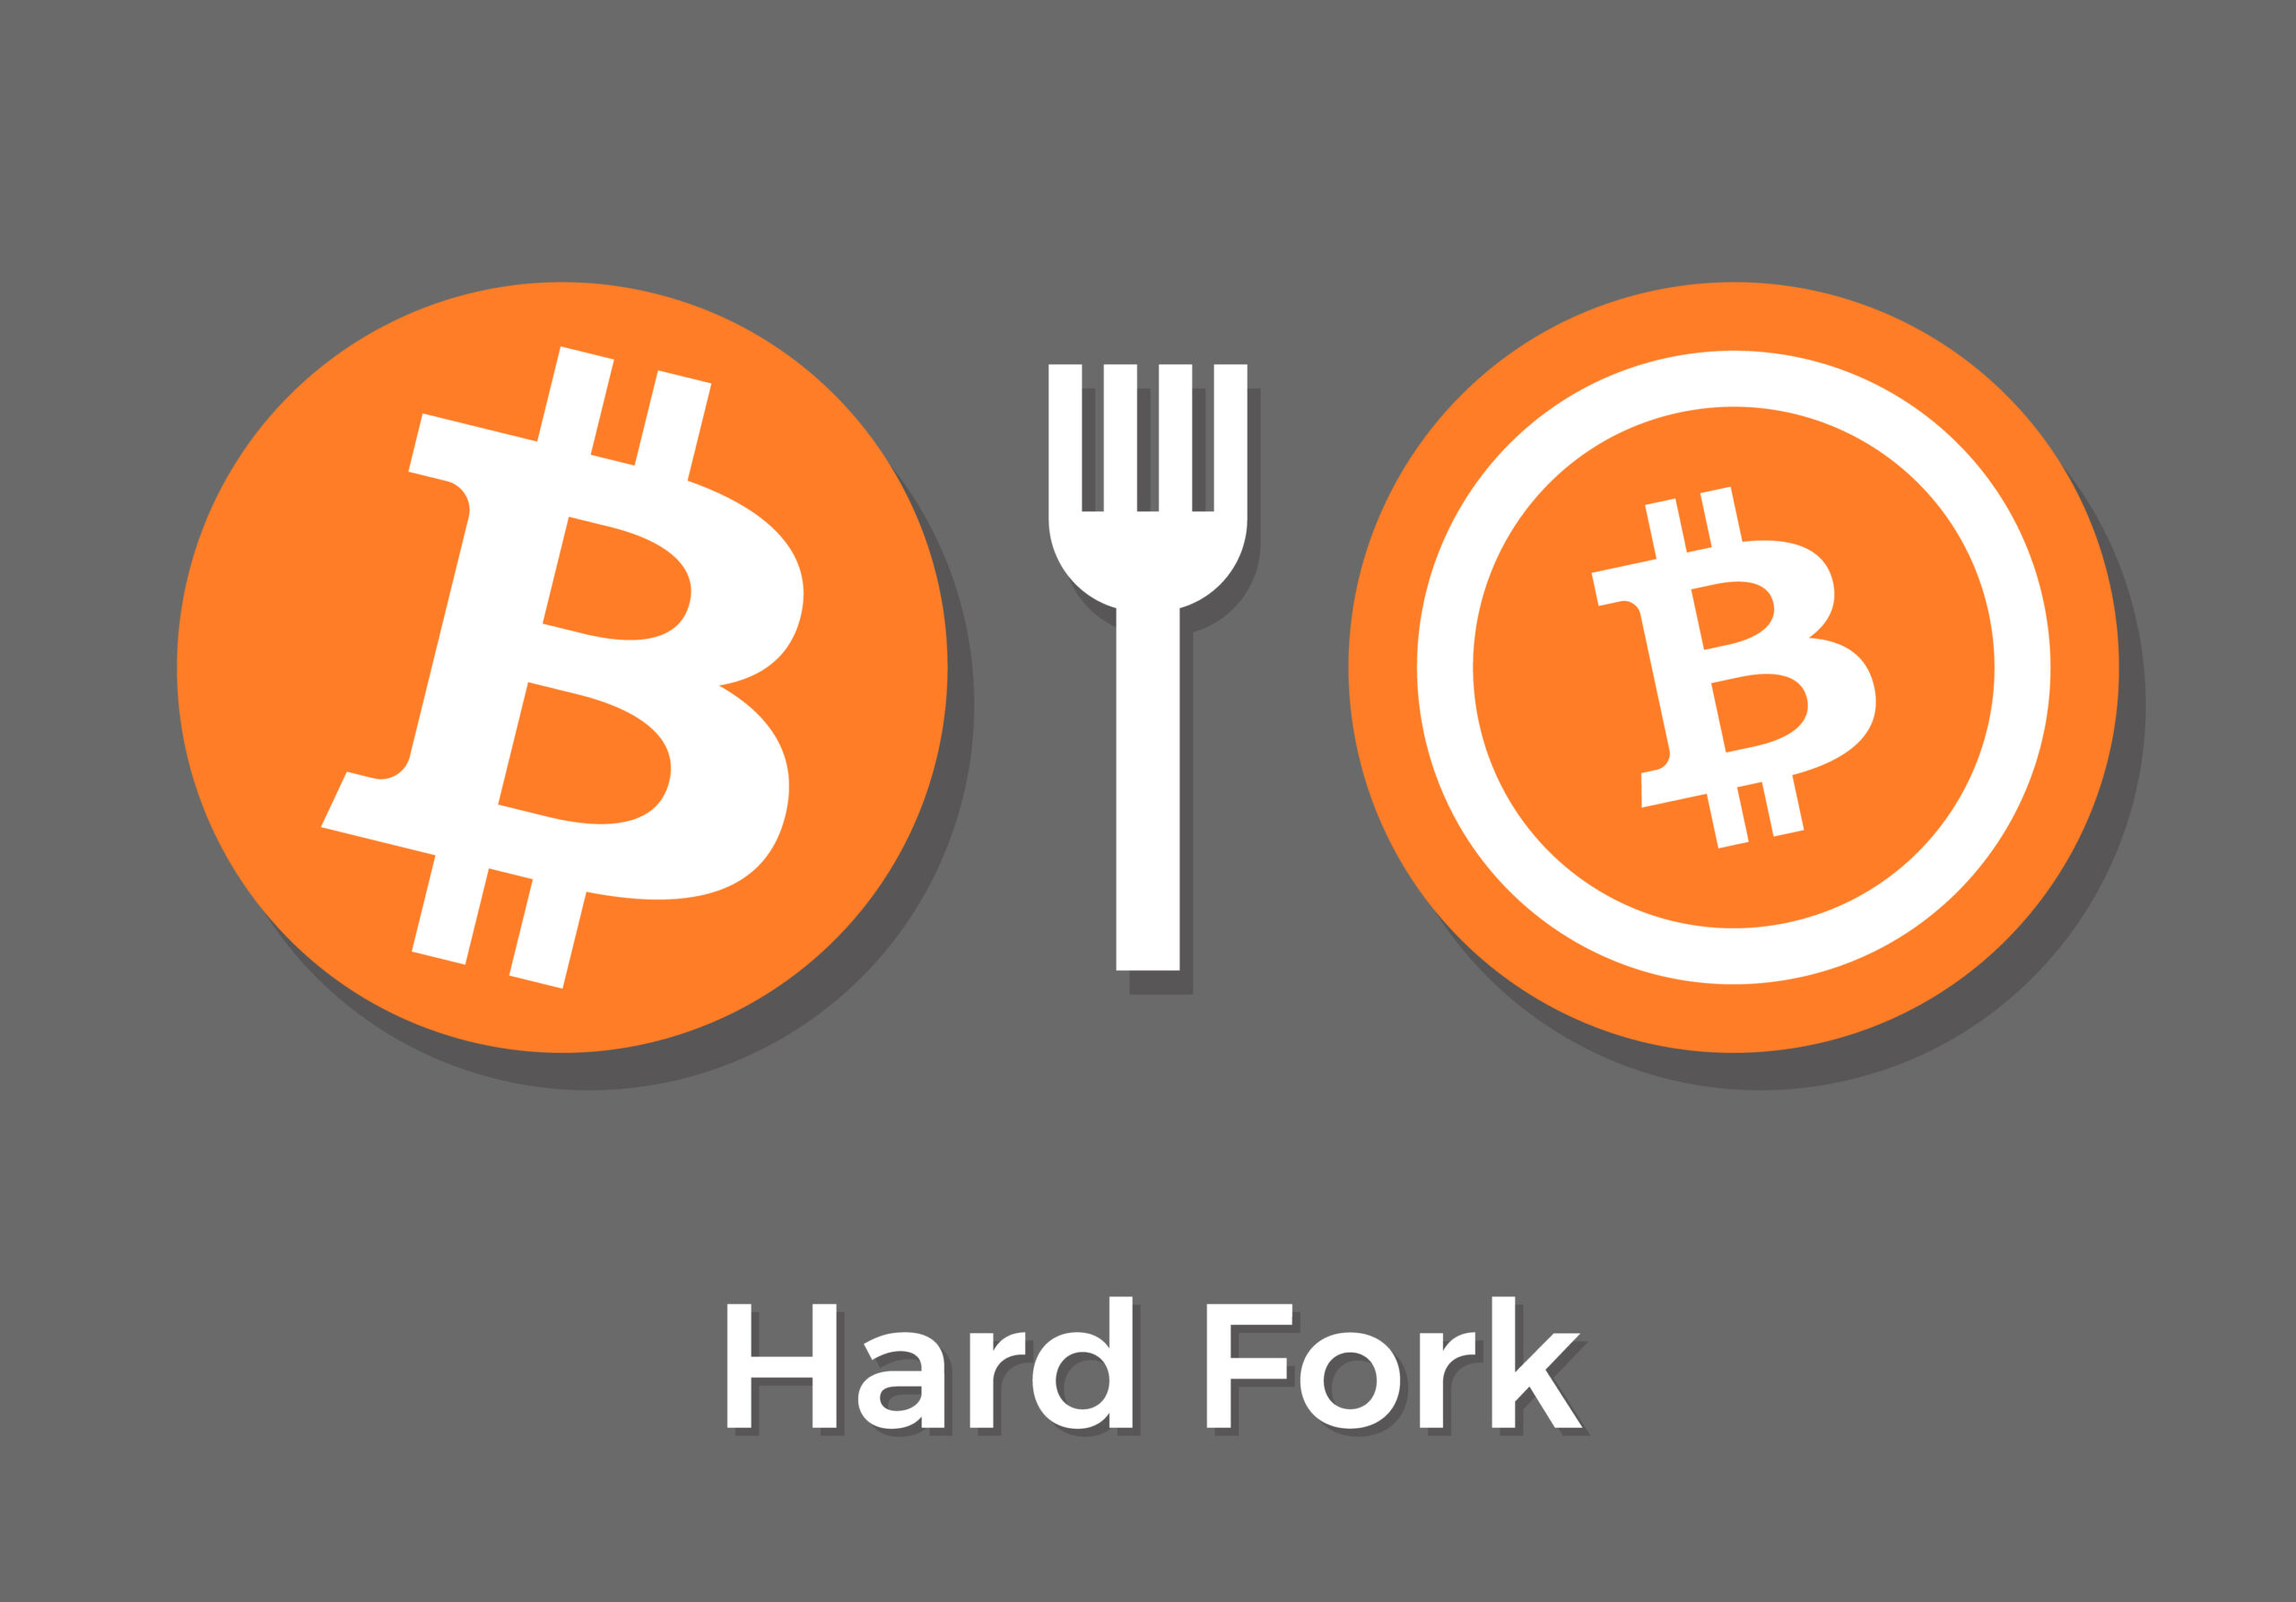 Bitcoin prices hit new highs. BCH's hard fork. Tron passes Ethereum.